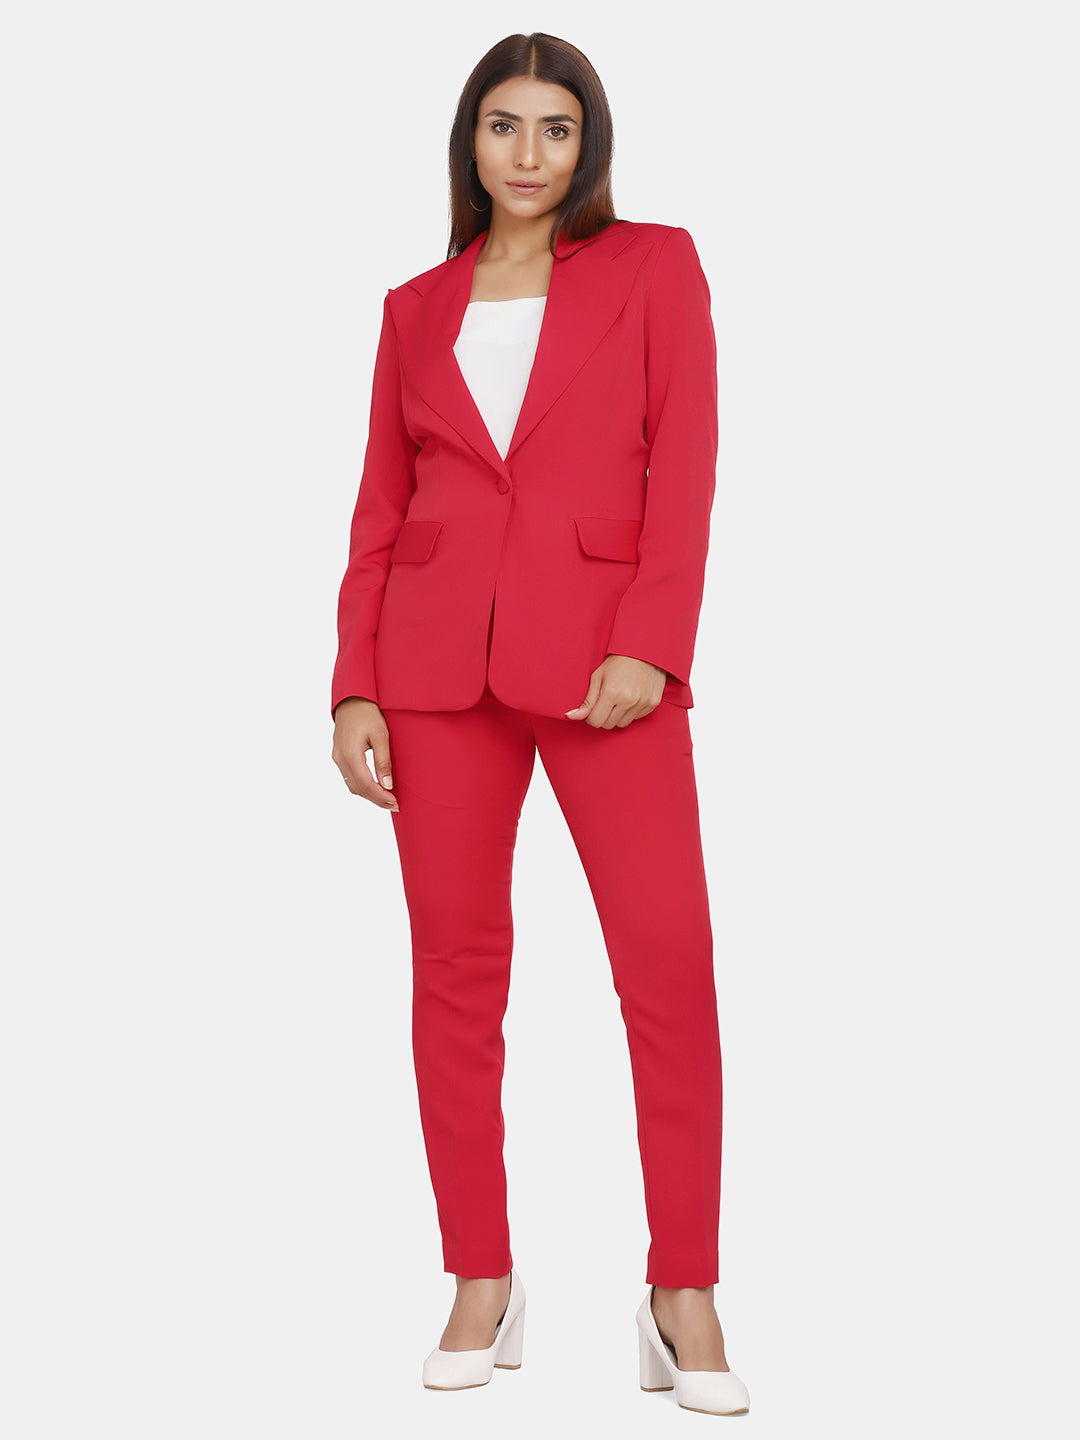 Red Formal Pant Suit For Work